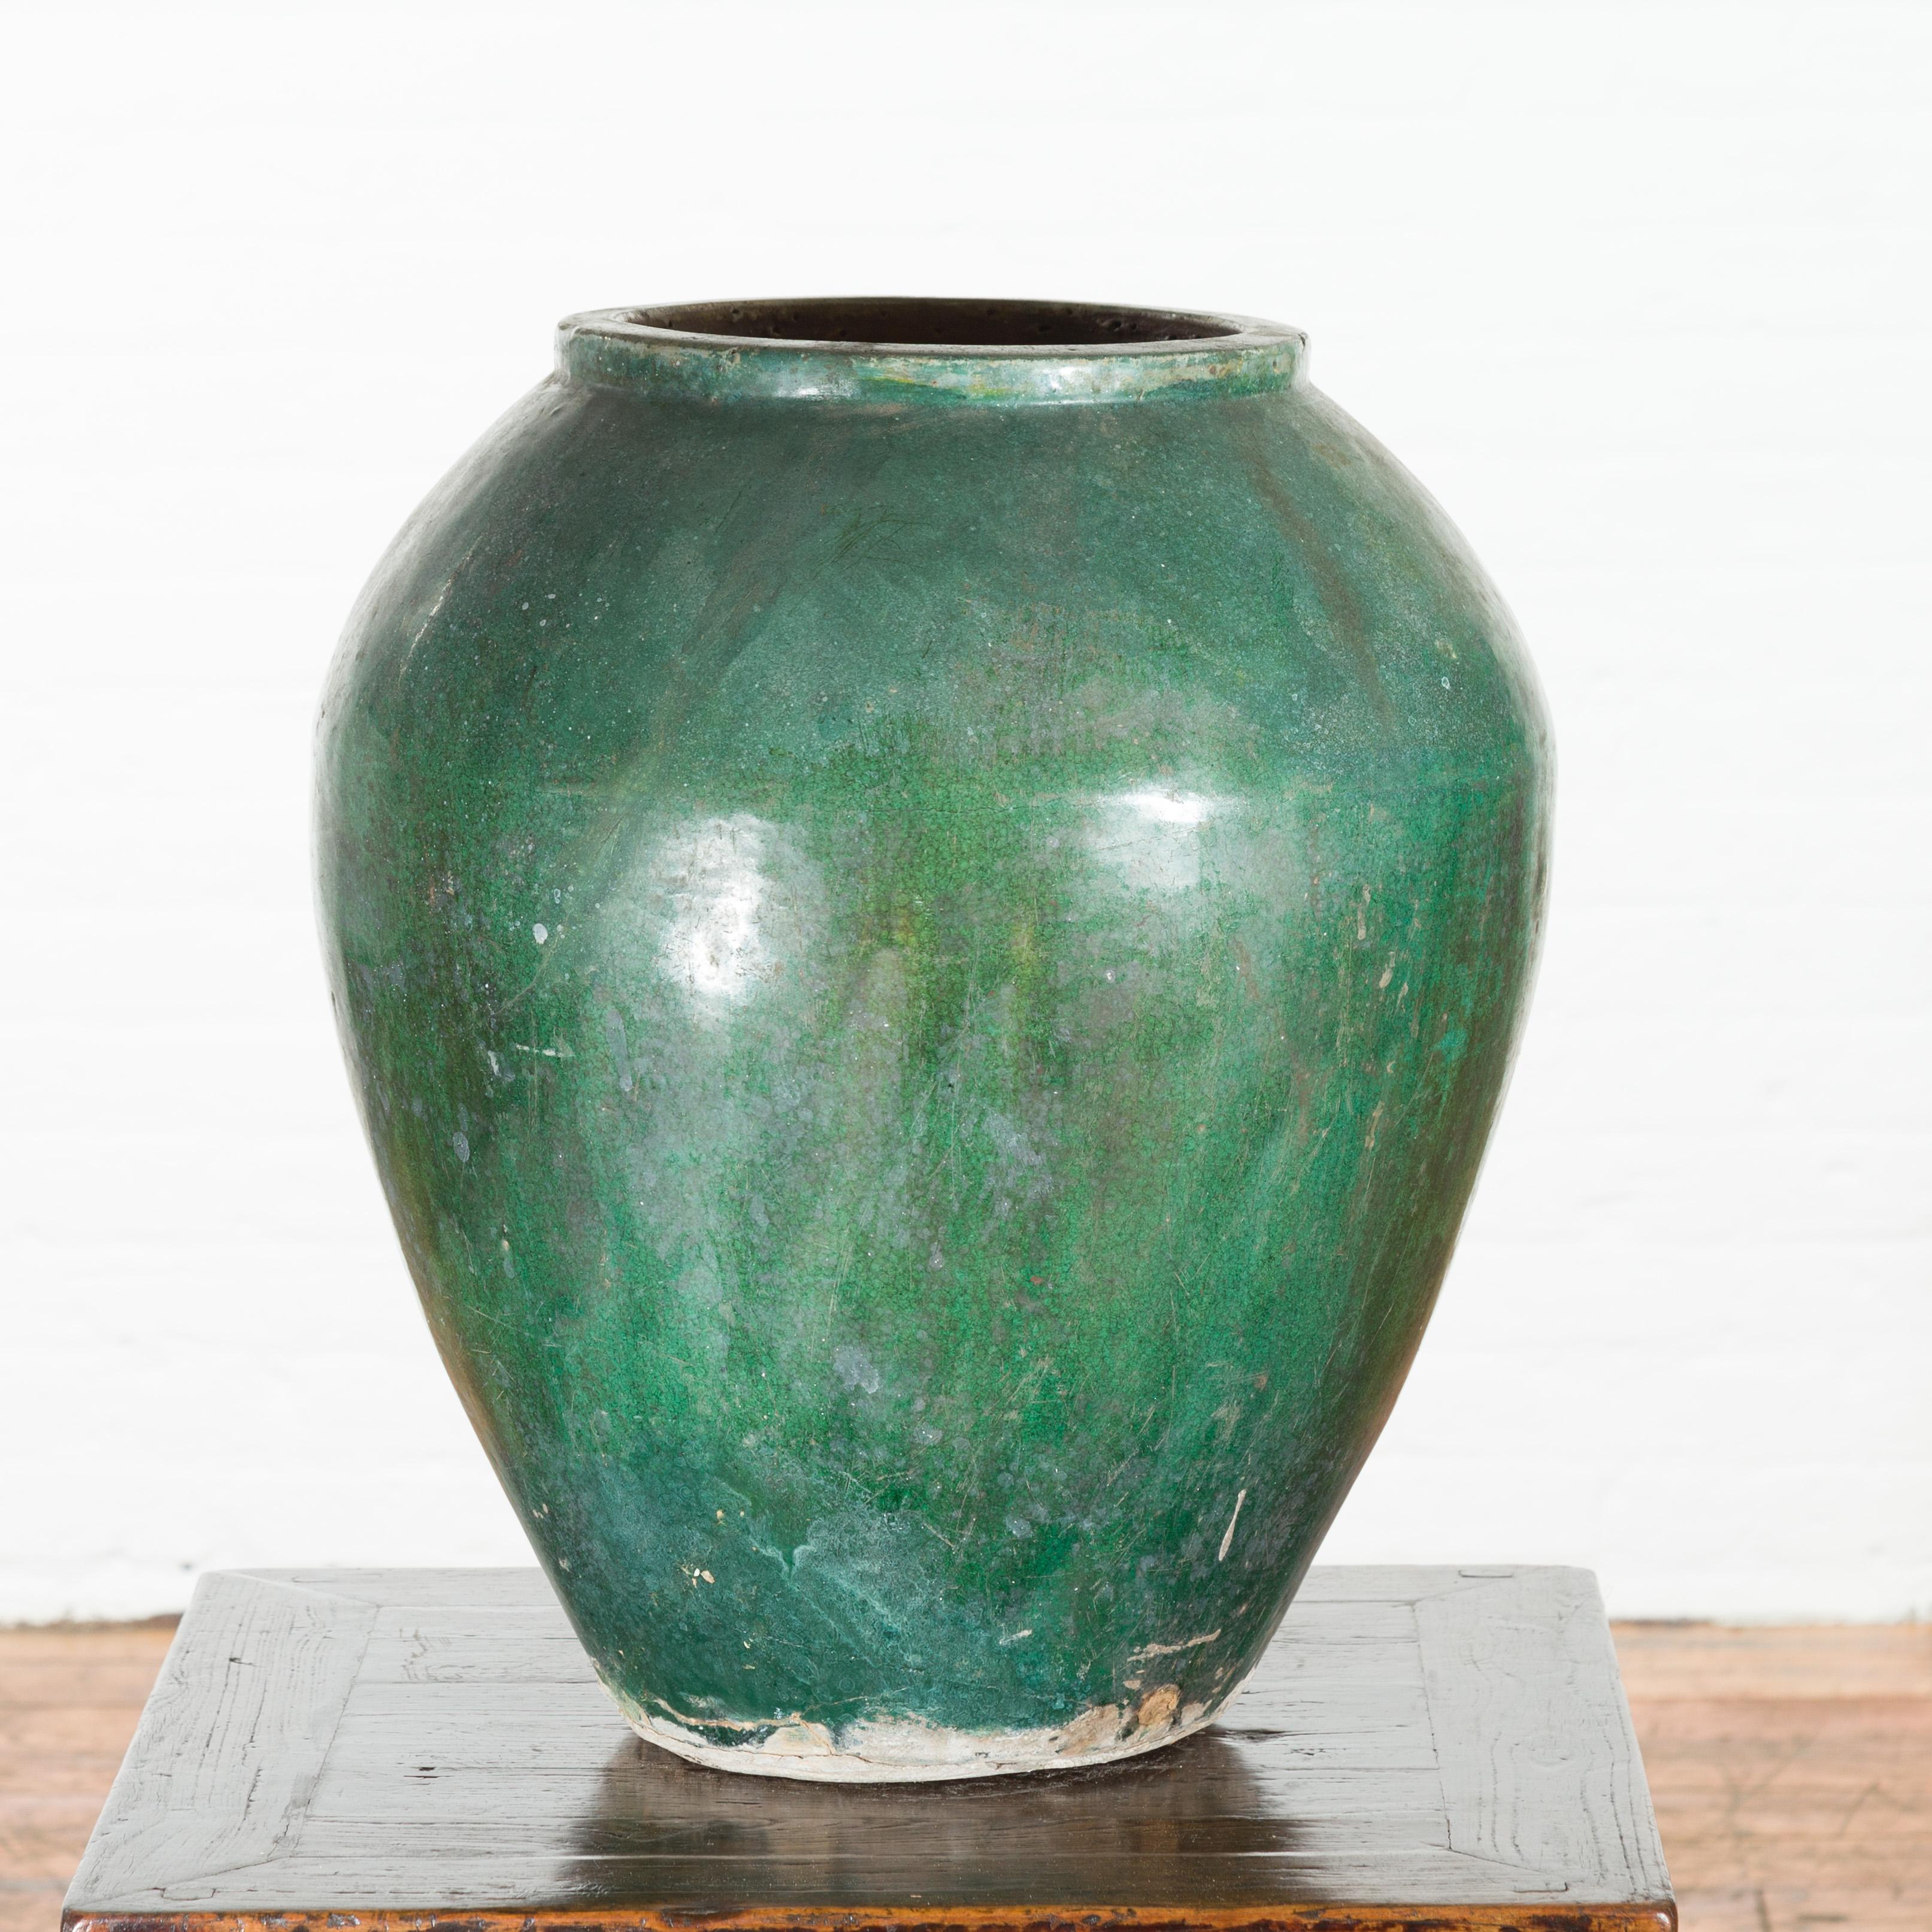 A Chinese vintage water jar from the mid 20th century, with verde patina. Created in China during the midcentury period, this green glazed water jar features a tapering body with nicely weathered appearance, topped with a lip surrounding an opening